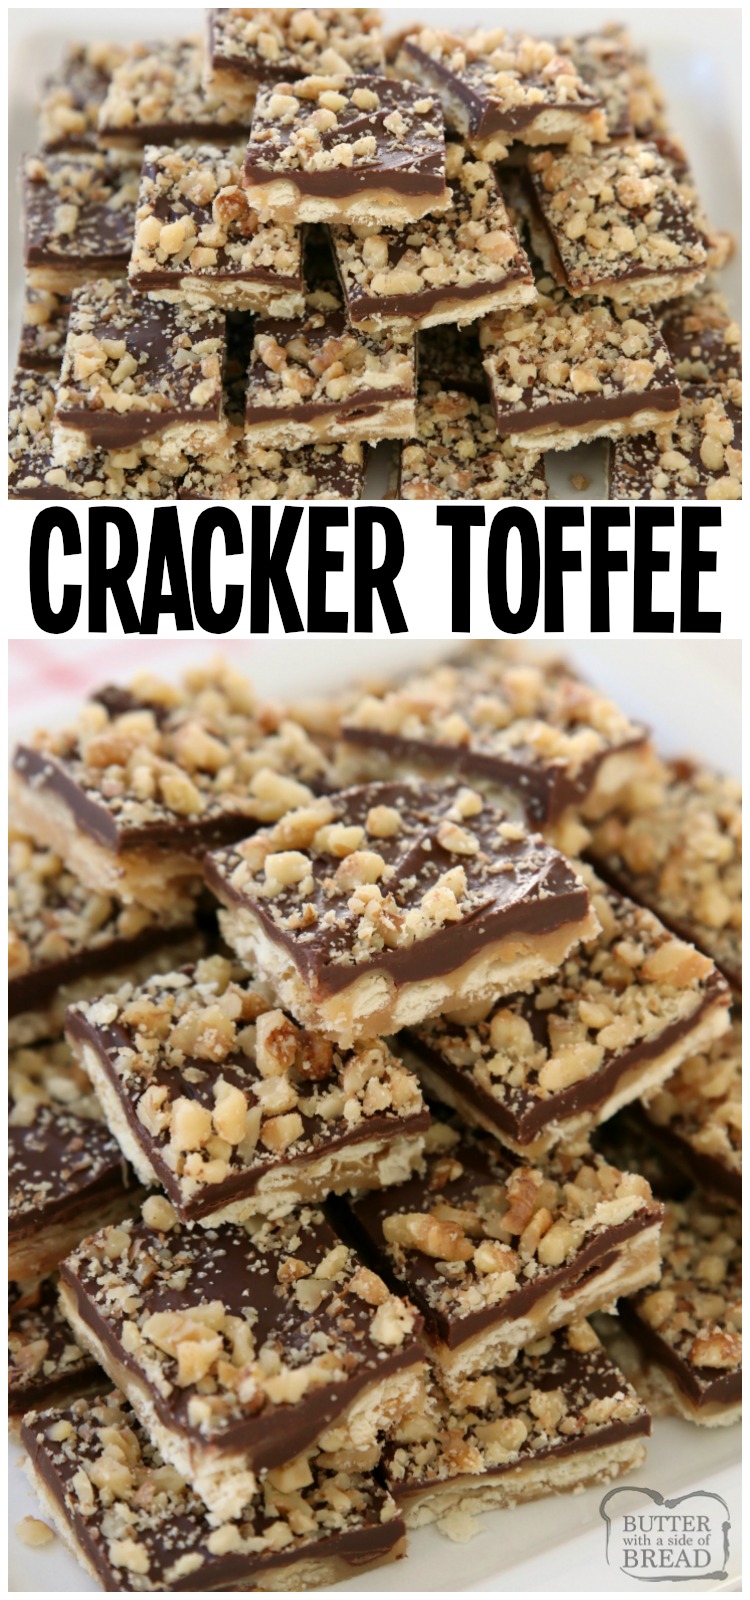 Easy Cracker Toffee is a simple toffee recipe made with saltine crackers, butter, sugar, chocolate & nuts! Perfect sweet & salty Christmas dessert for anyone who loves toffee. #Christmas #candy #toffee #recipe #Saltines #cracker #dessert #holidays recipe from BUTTER WITH A SIDE OF BREAD